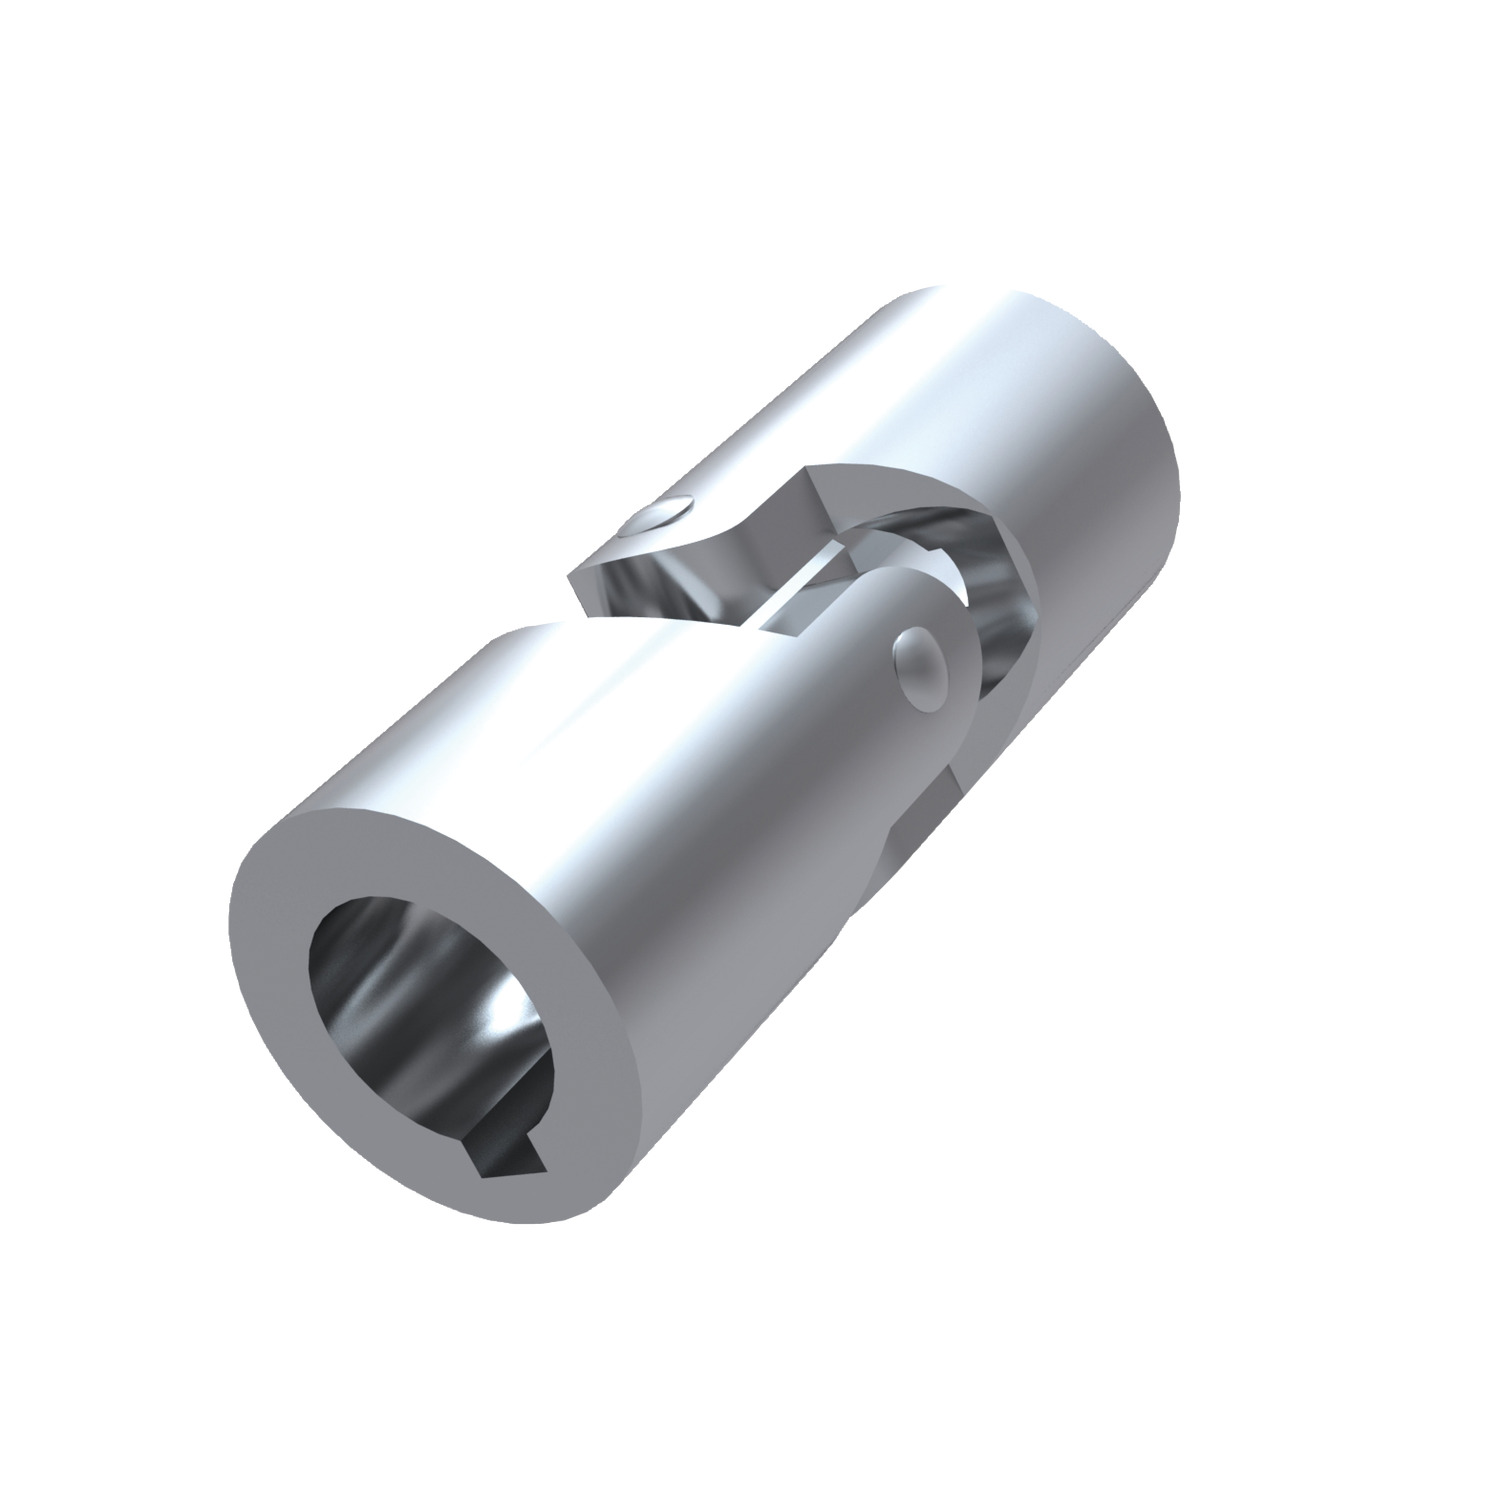 Single Universal Joint Steel single universal joints manufactured to DIN 808. Maximum bending angle of 45° per joint. With round bore or with keyway.